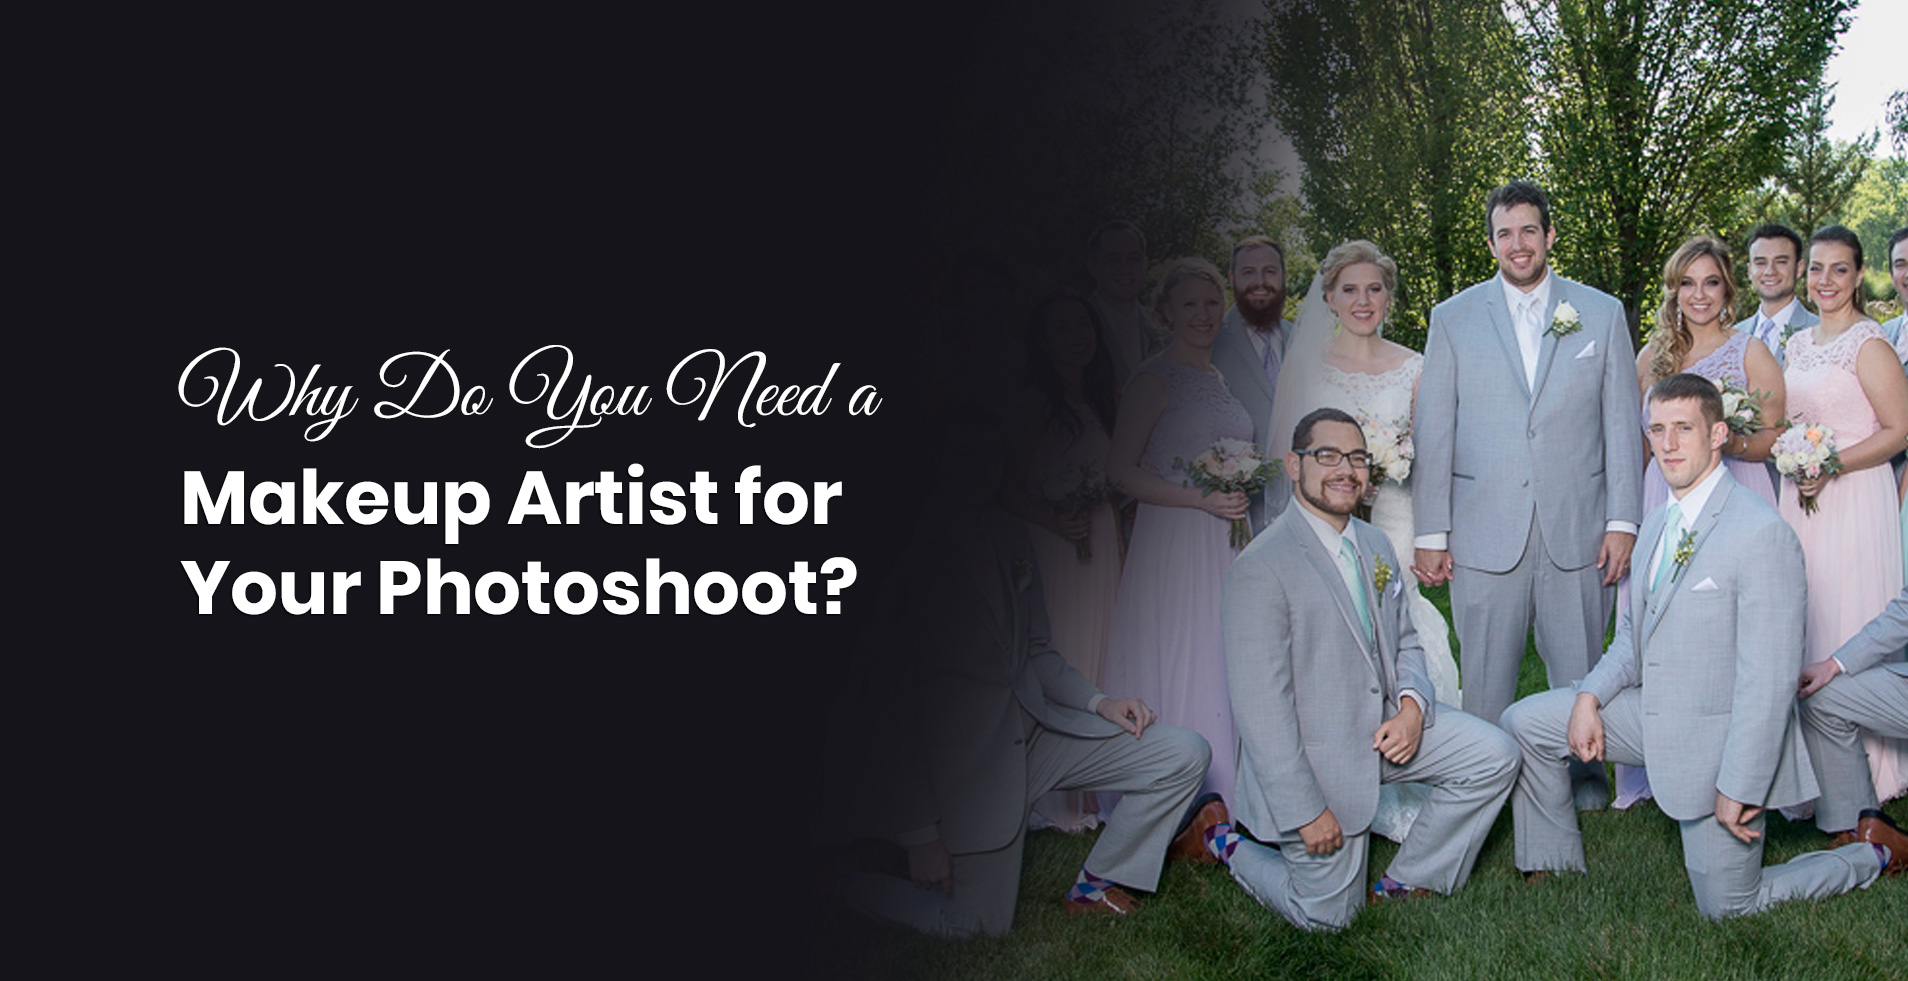 Why Do You Need a Makeup Artist for Your Photoshoot?